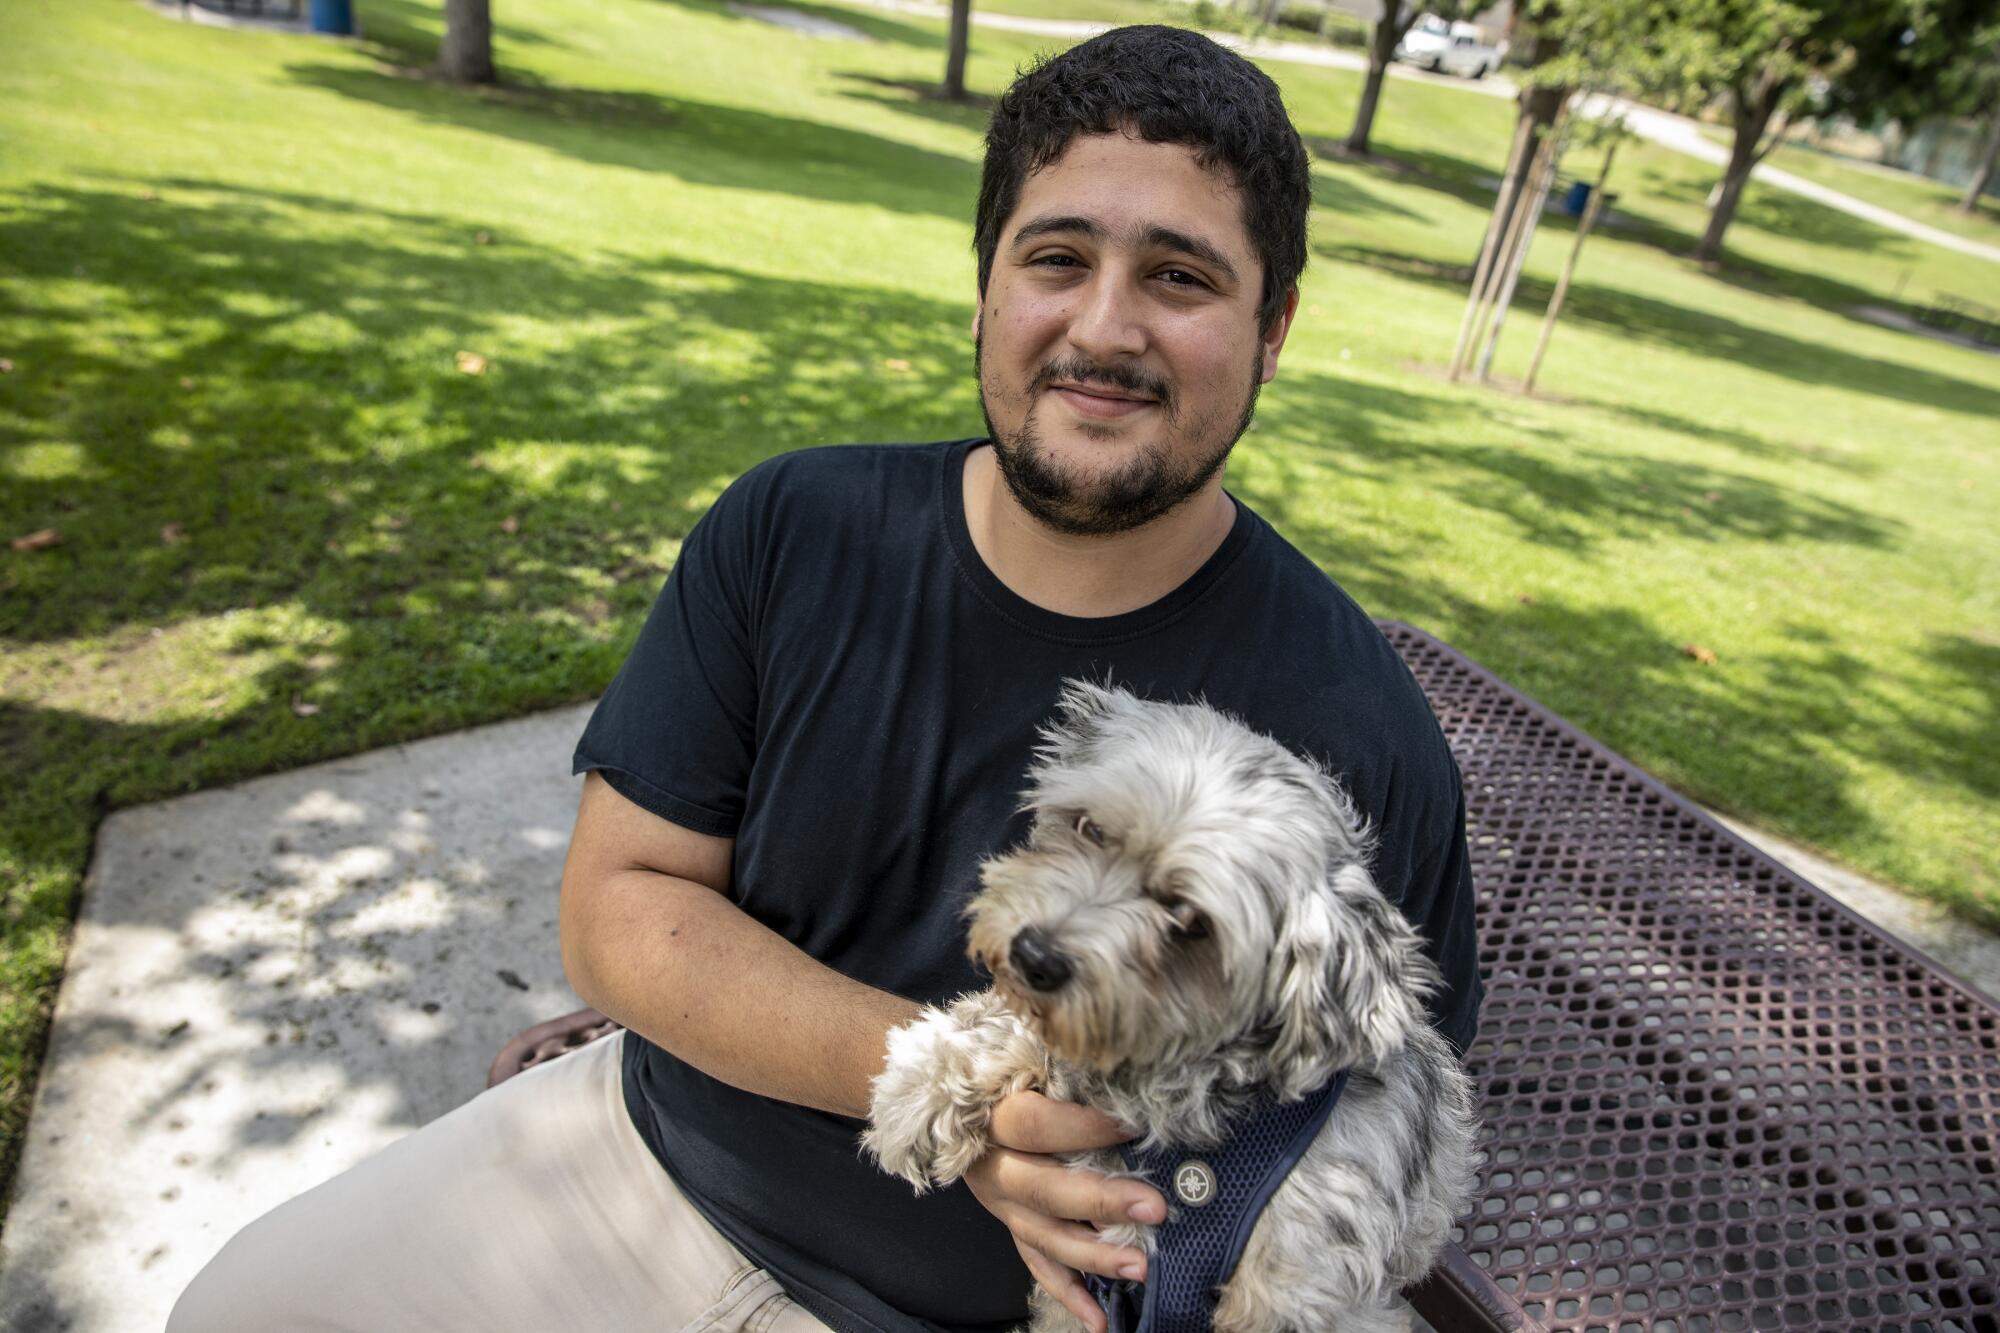 Cudahy resident Ulysses Sandoval, 25, pauses on a walk with his dog Chia, in a park near his home. 